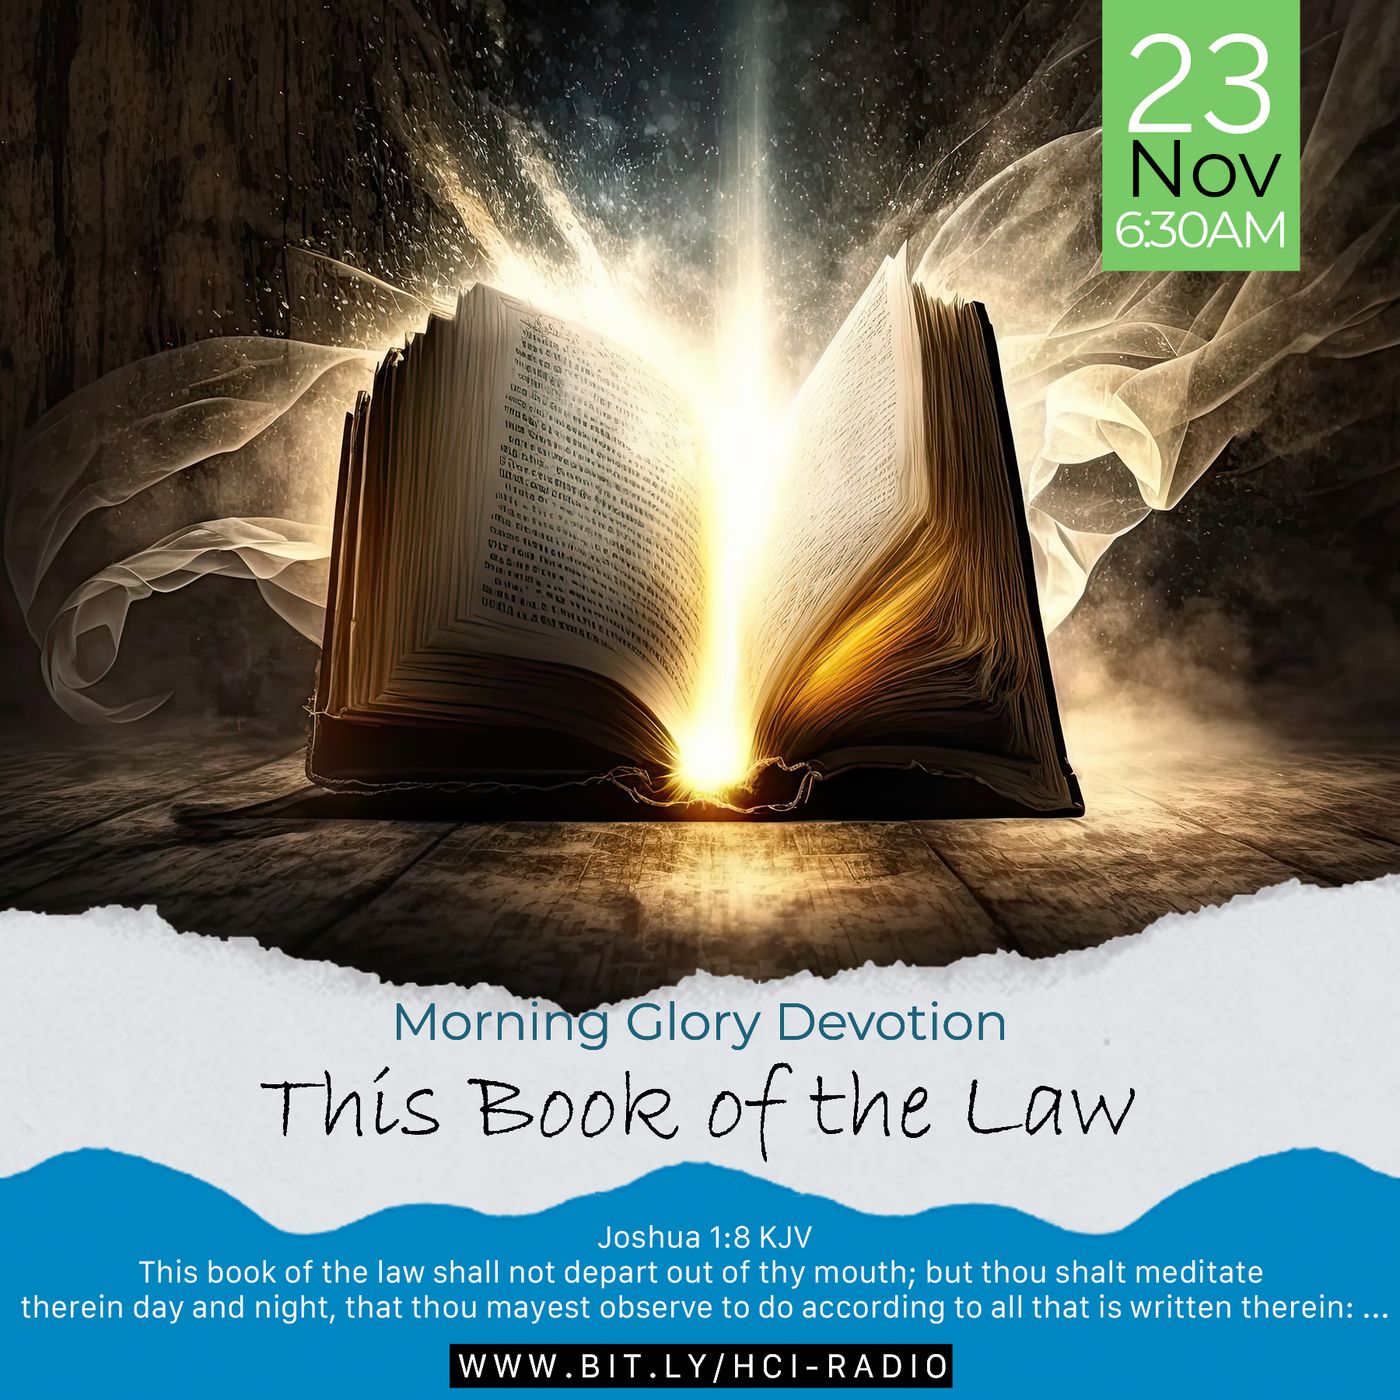 MGD: This Book of the Law